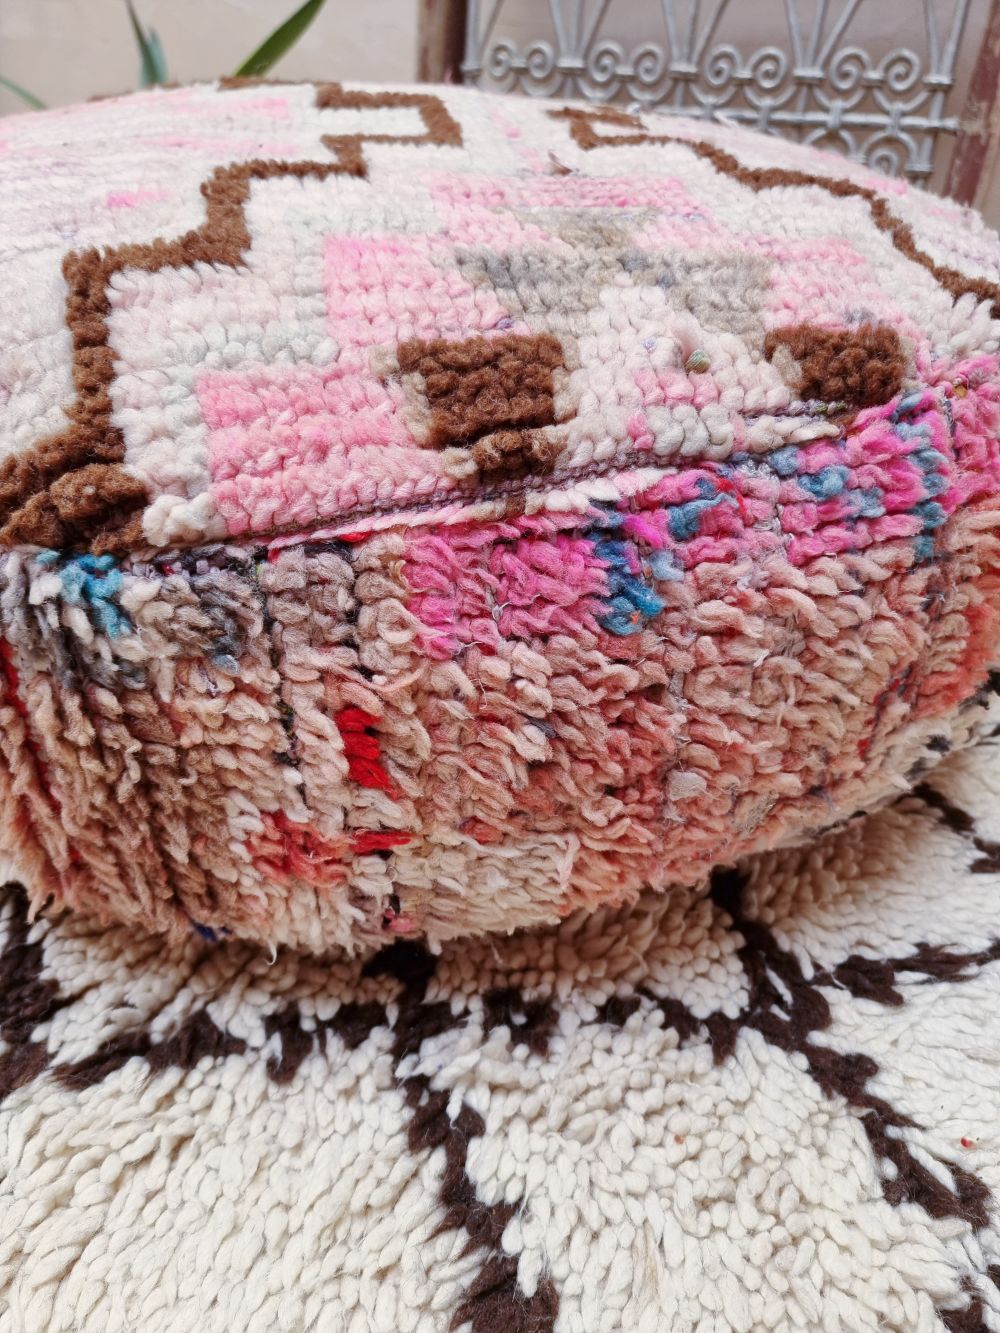 Moroccan Vintage Pink Round Pouf